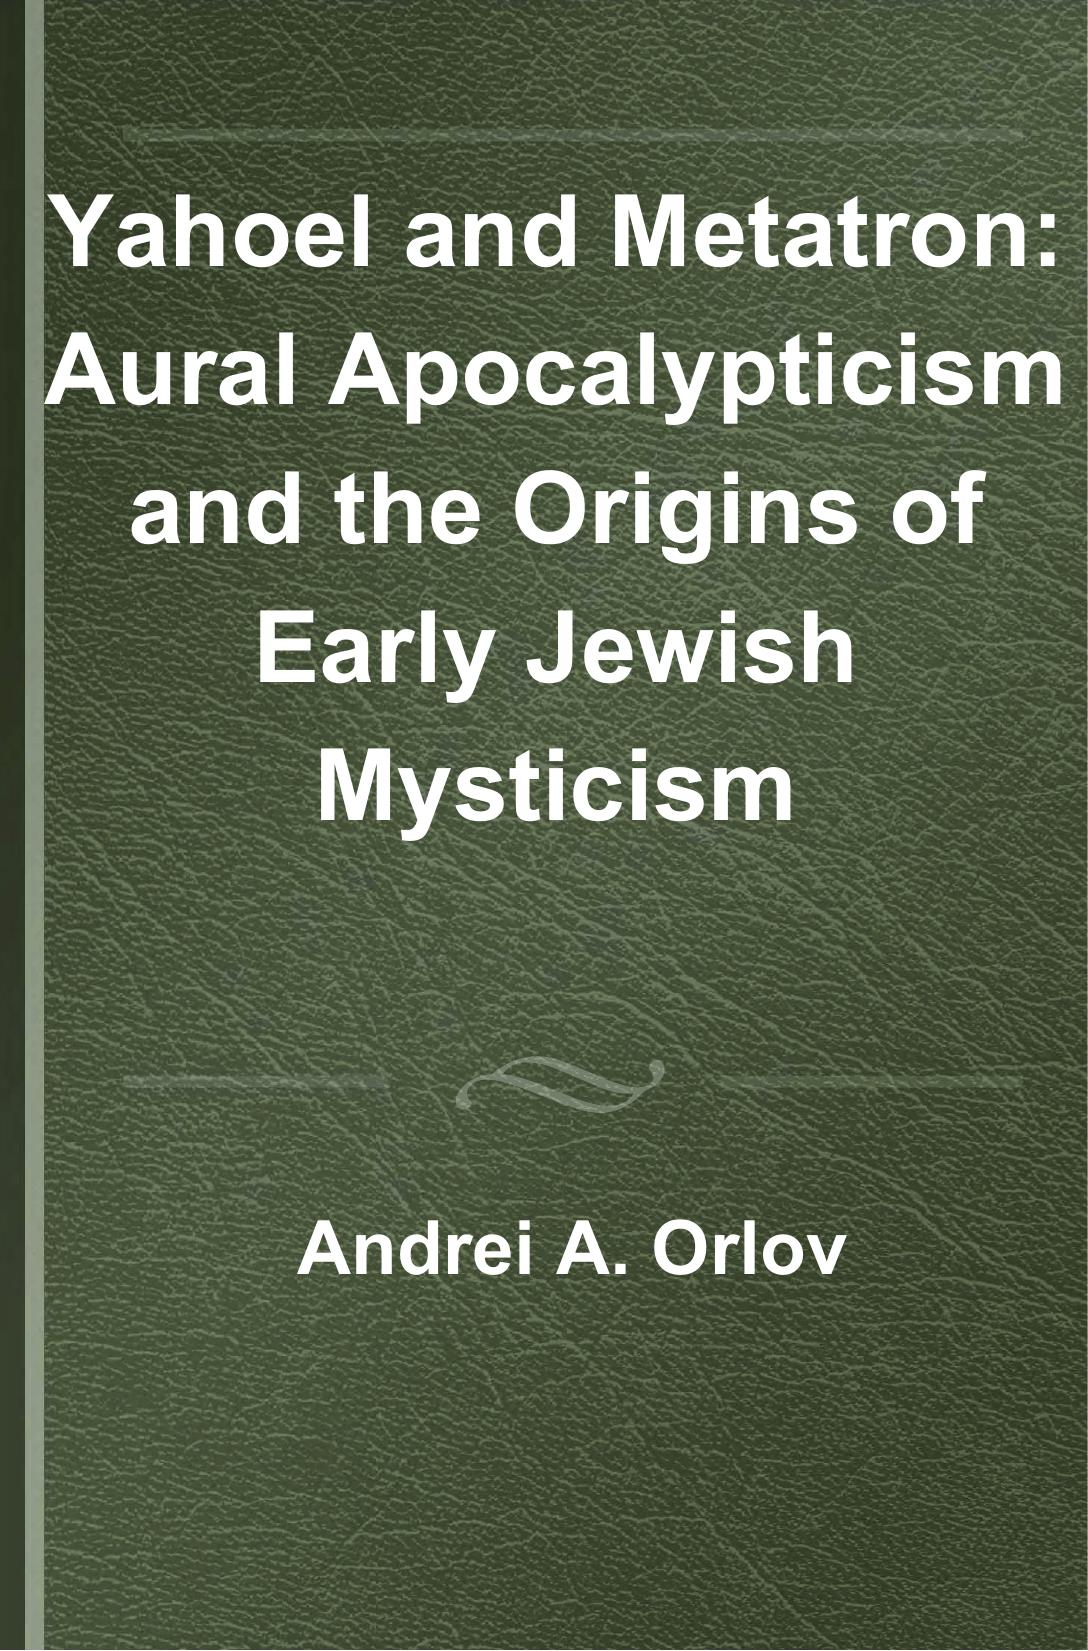 Yahoel and Metatron. Aural Apocalypticism and the Origins of Early Jewish Mysticism by Andrei A. Orlov